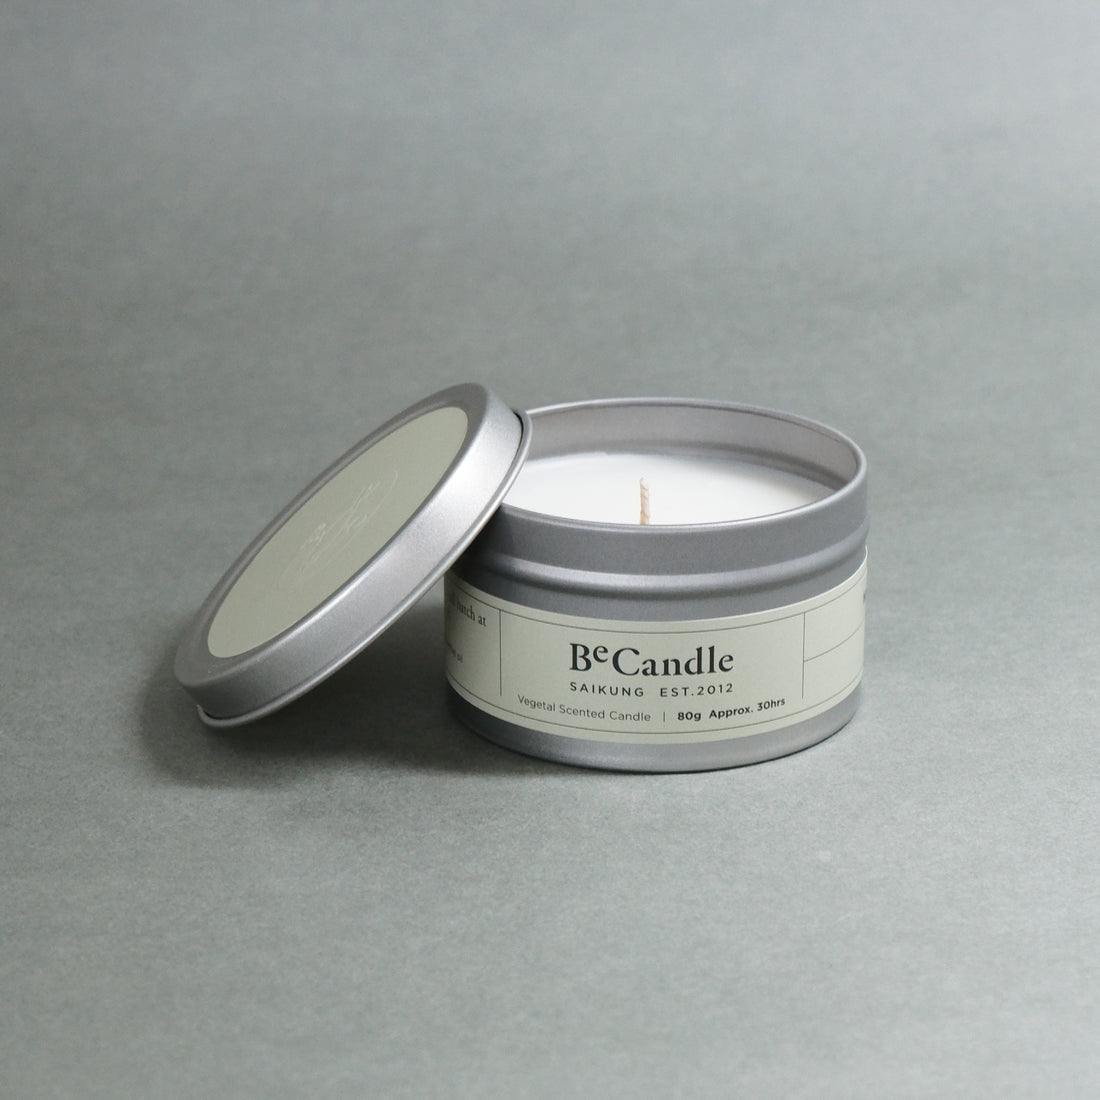 becandle_travel_candle_tin_can_80g_92_grapefruit_bamboo_scented_candle_made_in_saikung